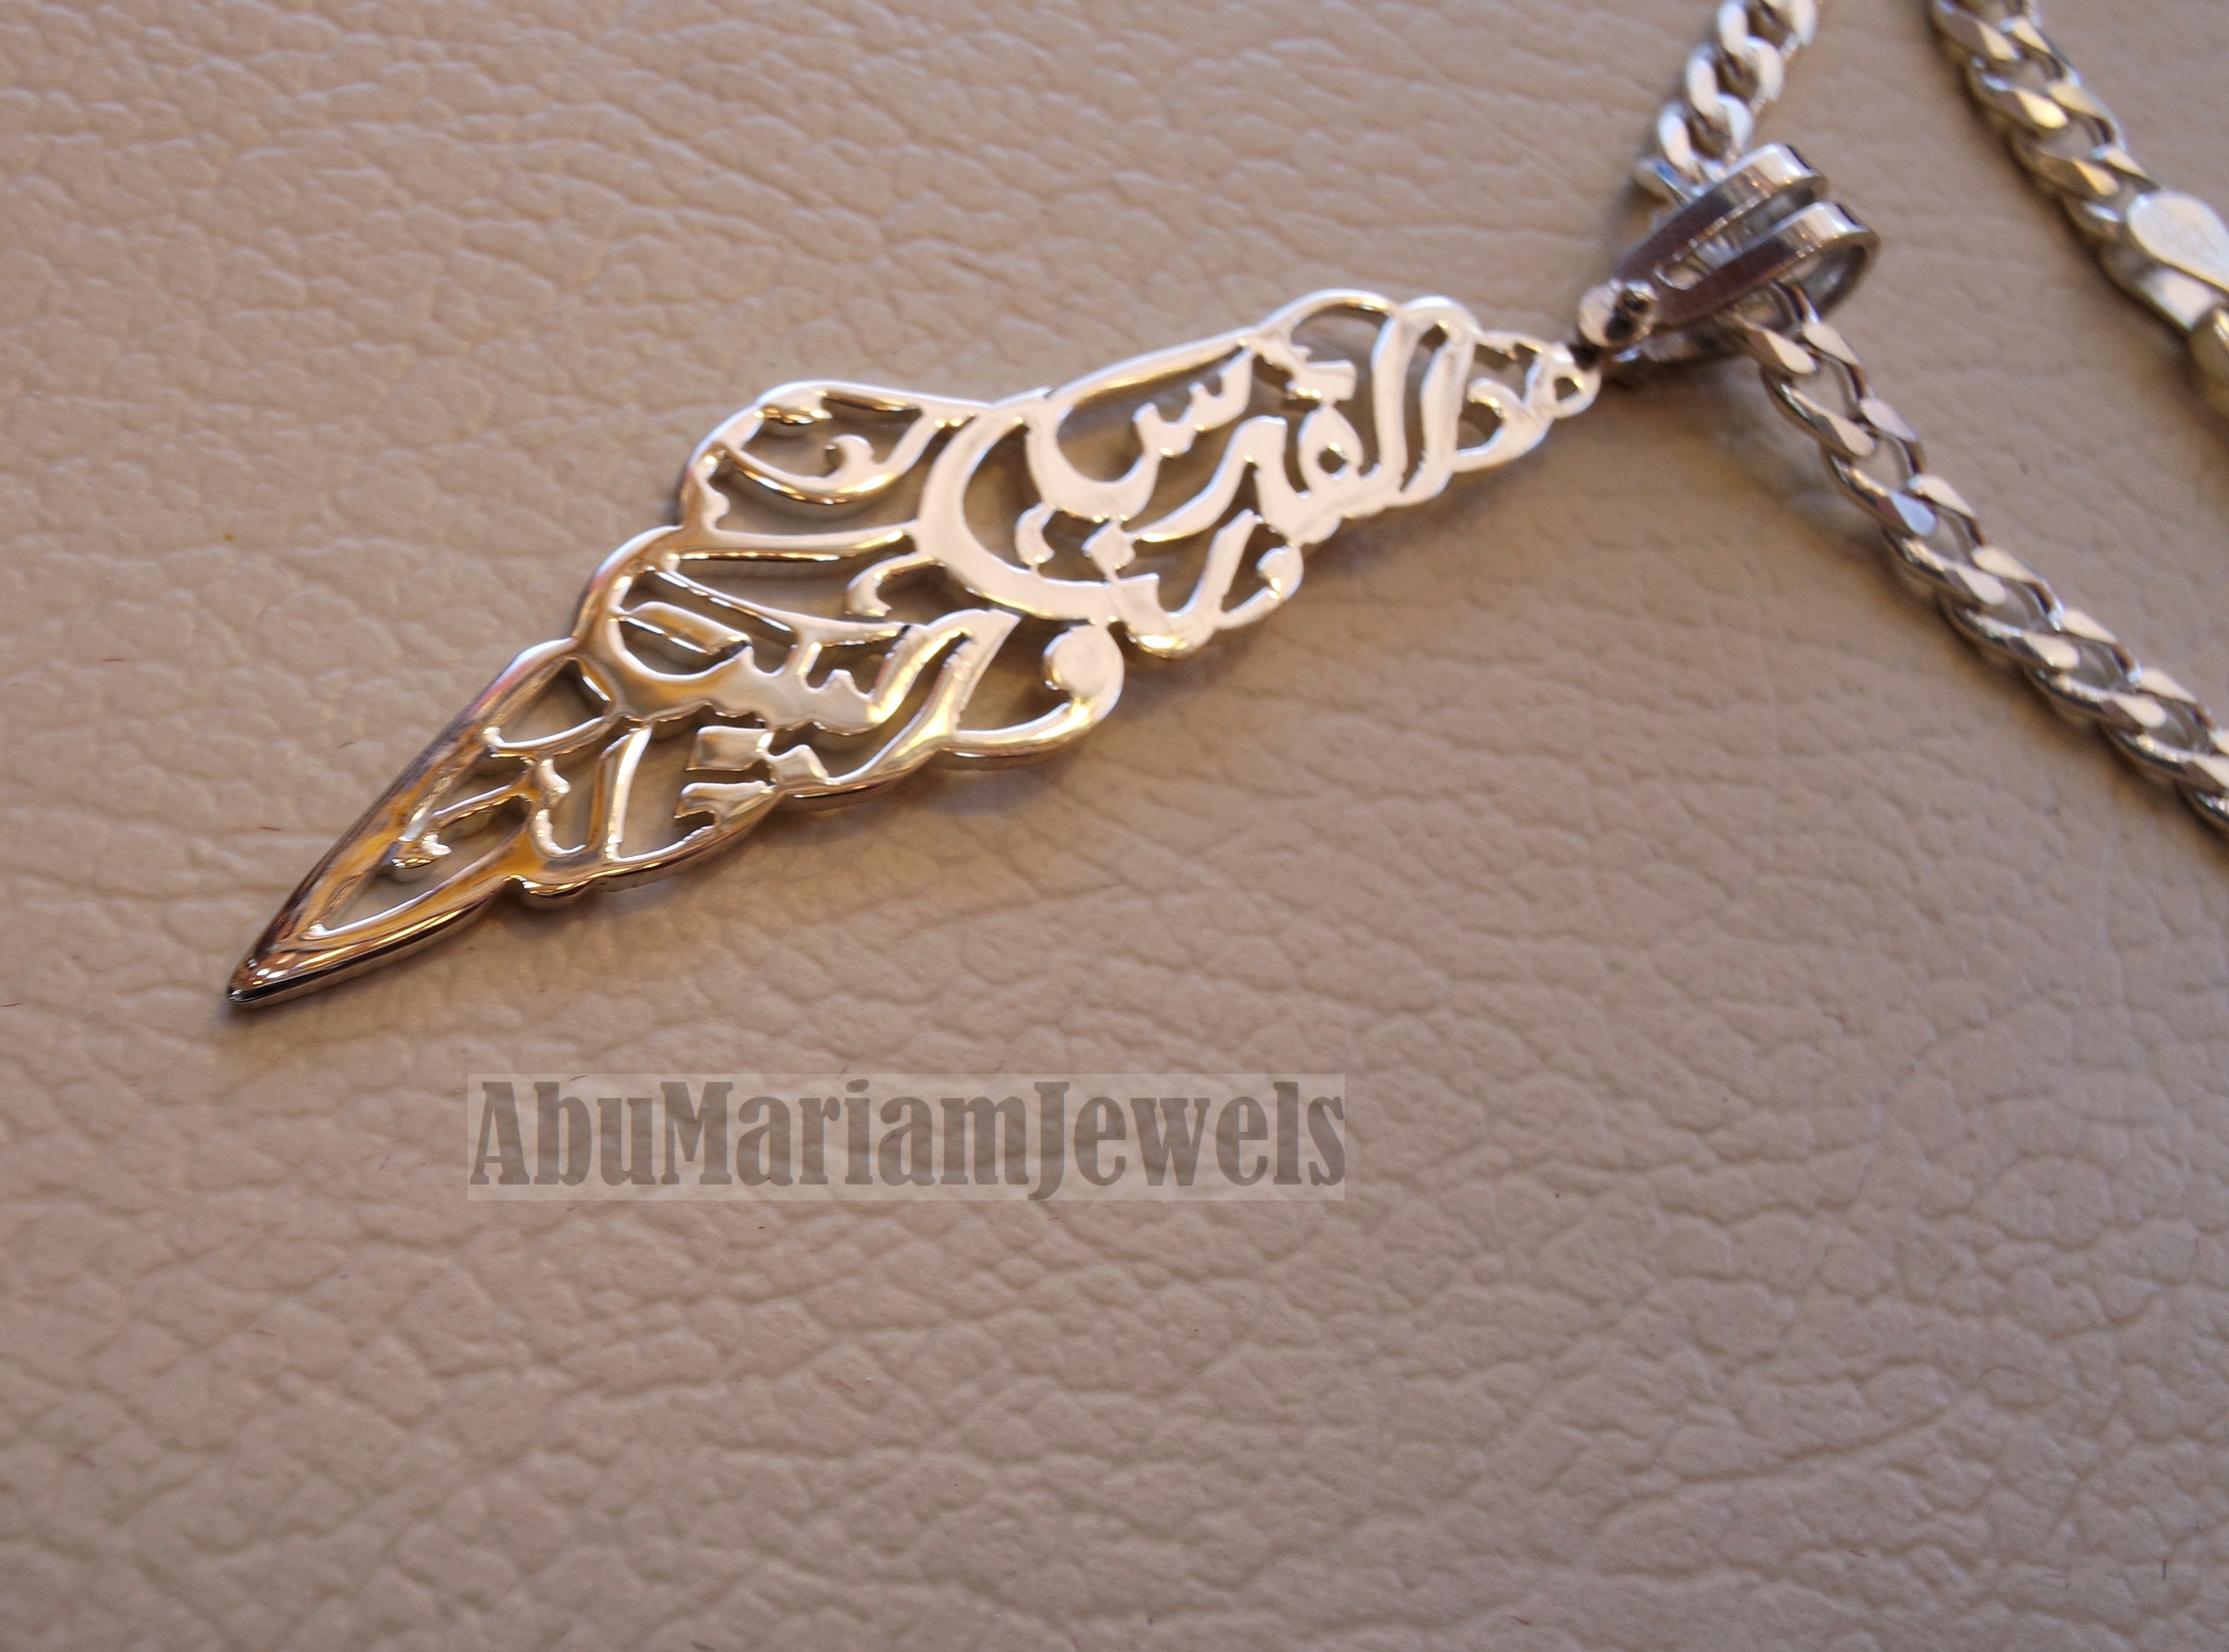 Palestine map pendant with thick chain 2 Jerusalem is ours and the house is ours : القدس لنا و البيت لنا